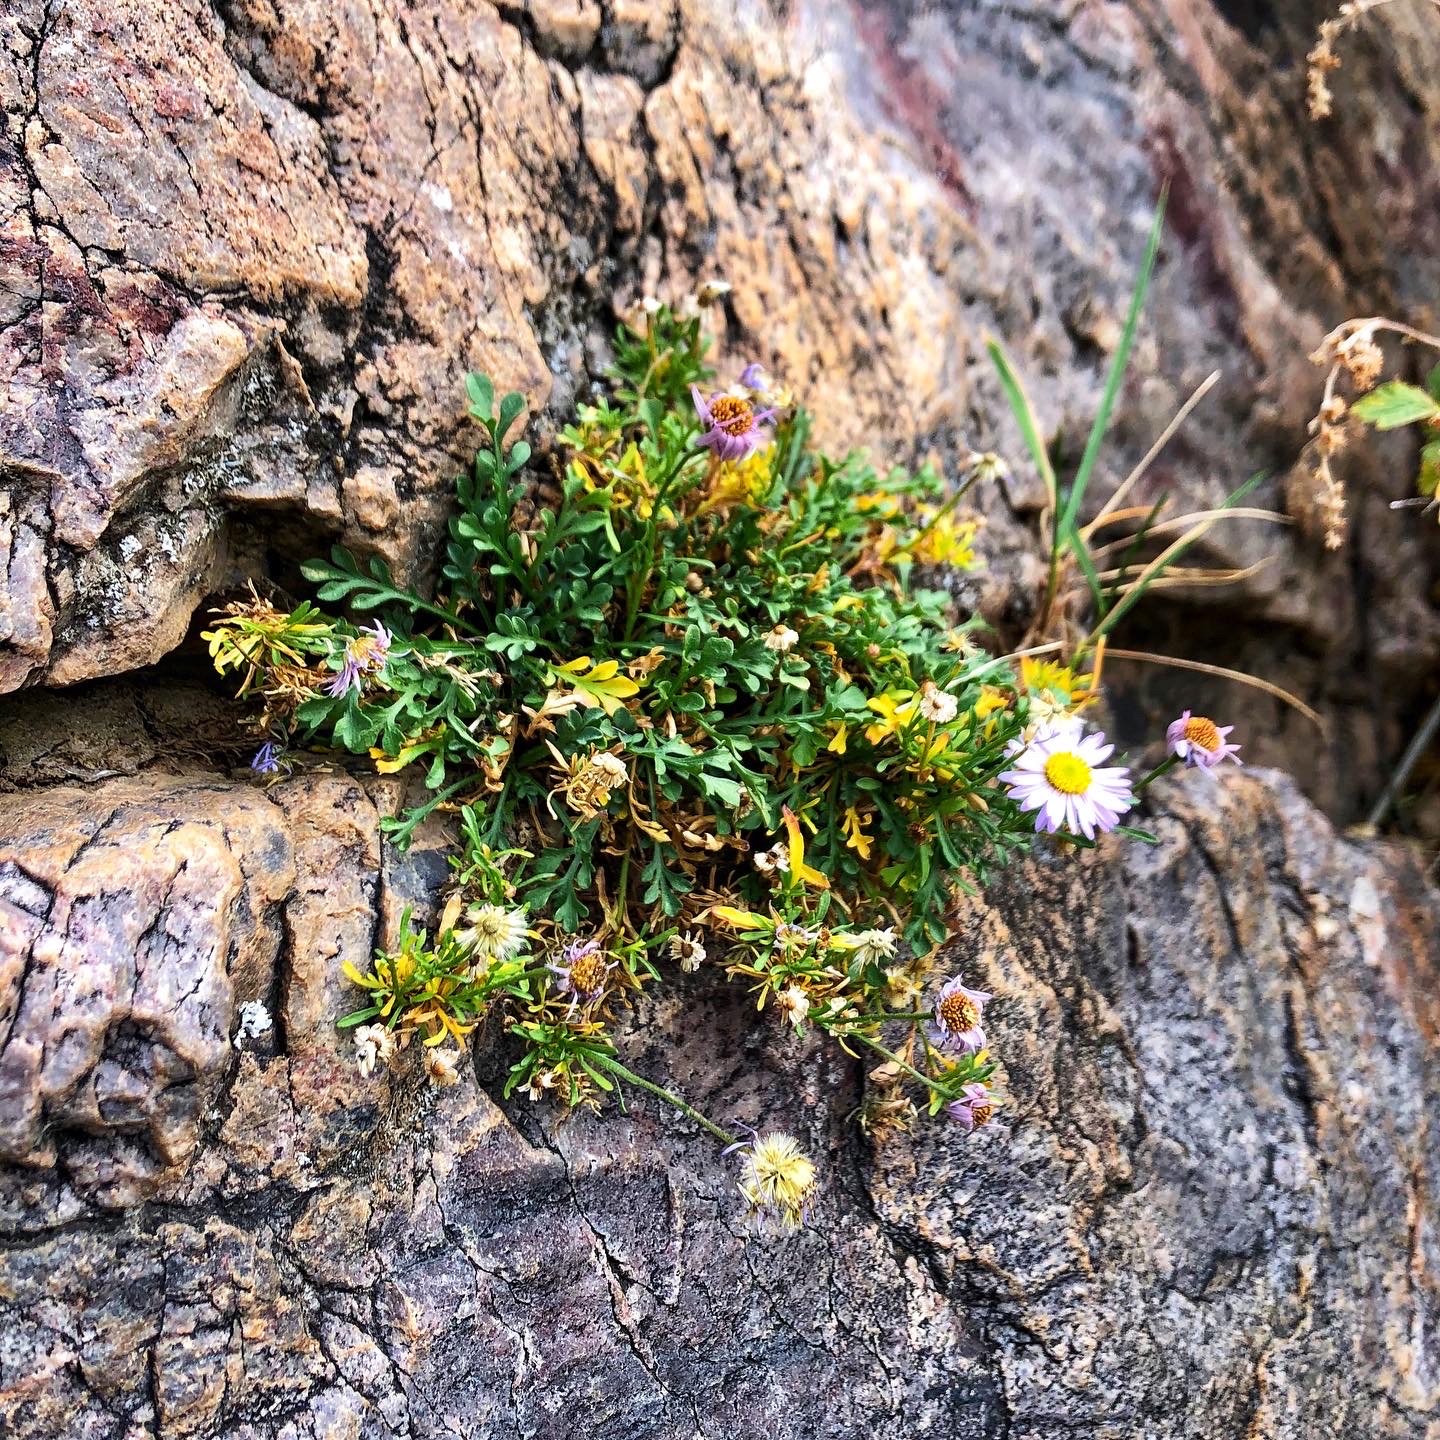 Wildflowers growing from a crack in the rock